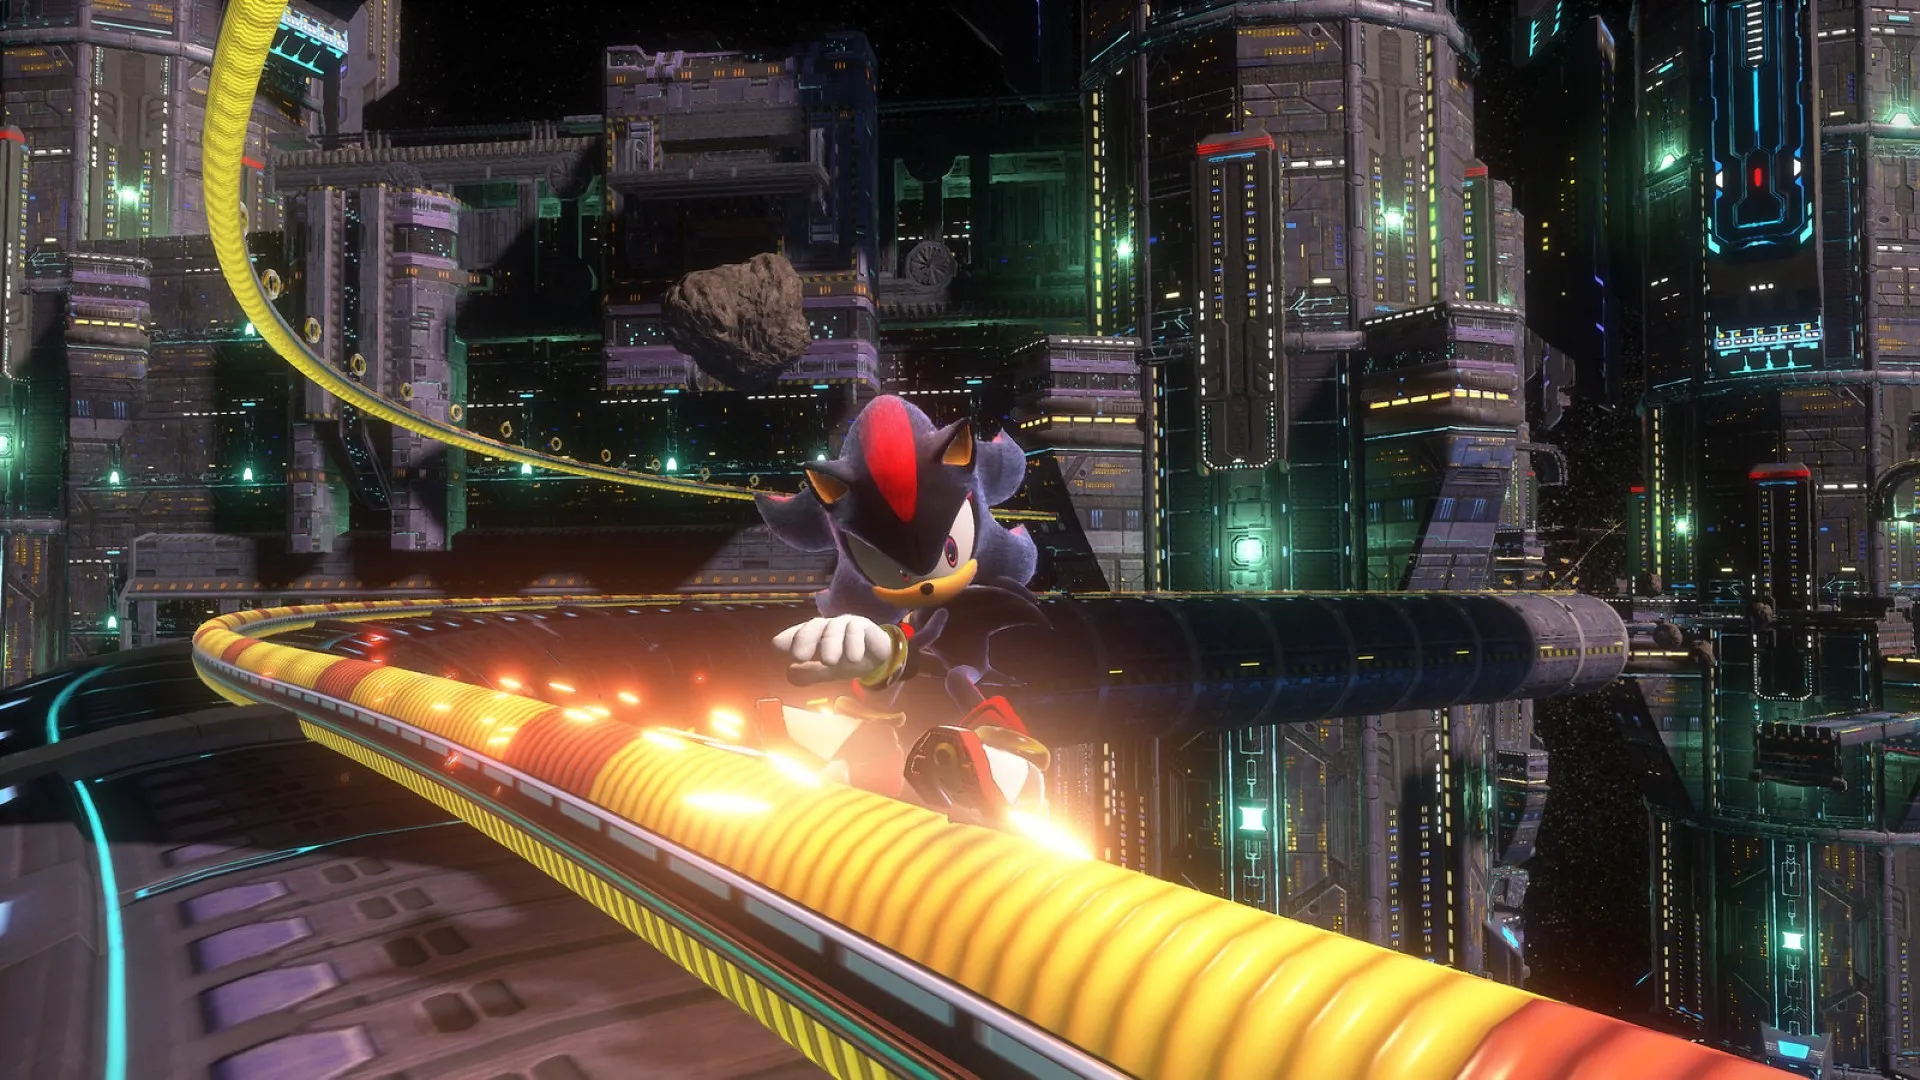 Sonic x Shadows Generations - Release Date, New Trailer & More